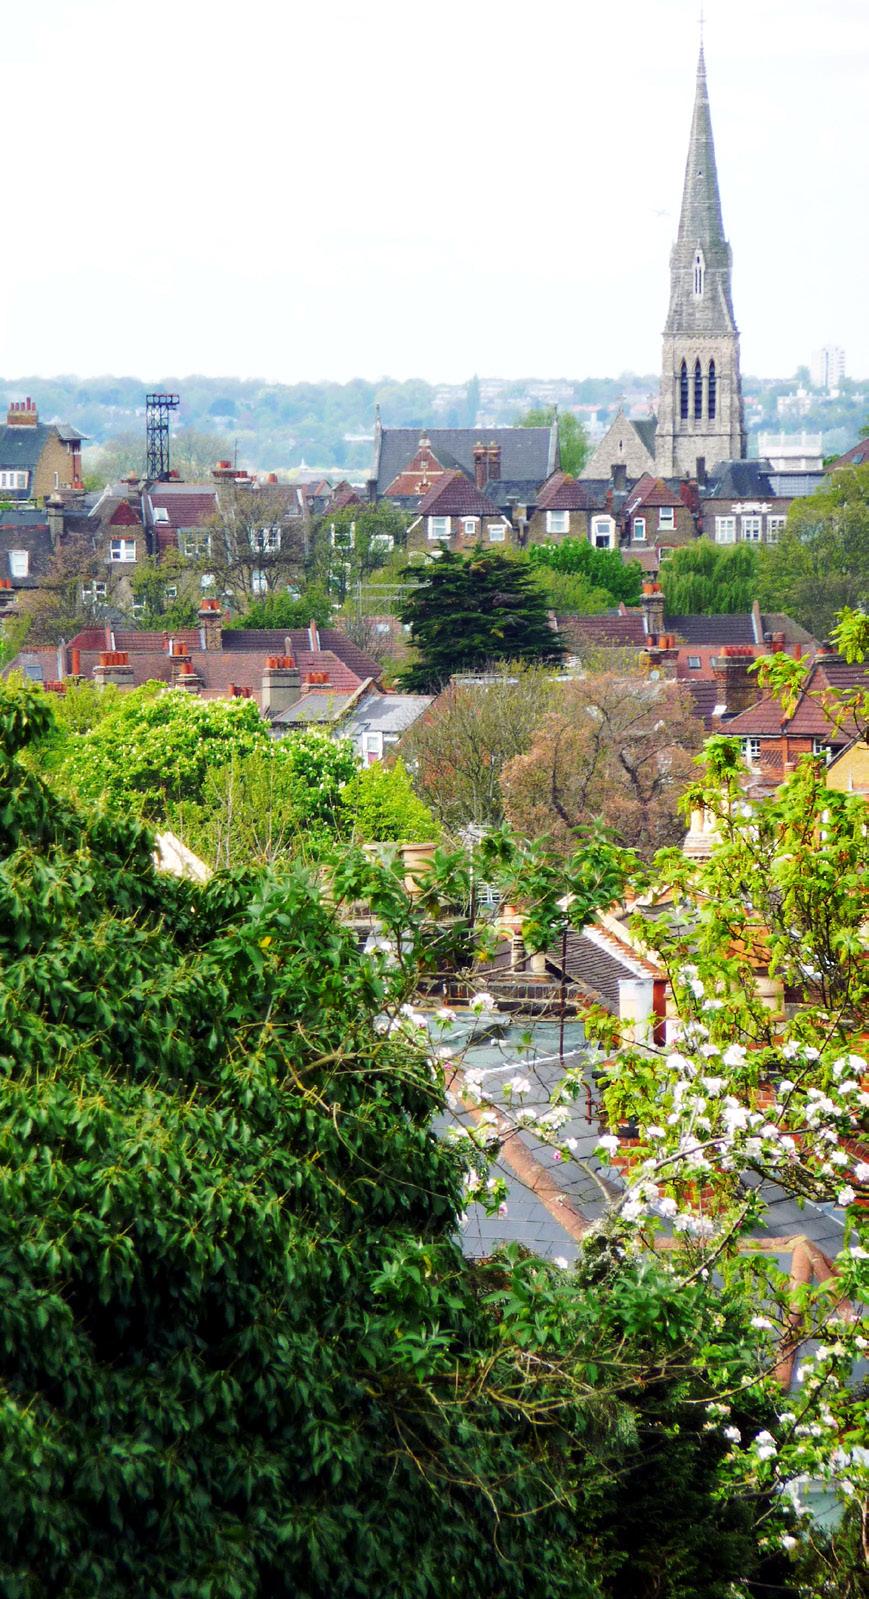 The good thing about Streatham is that it is very well connected to central London and to more vibrant neighbouring areas like nearby Brixton and Clapham, but is a lot cheaper to live in than them!